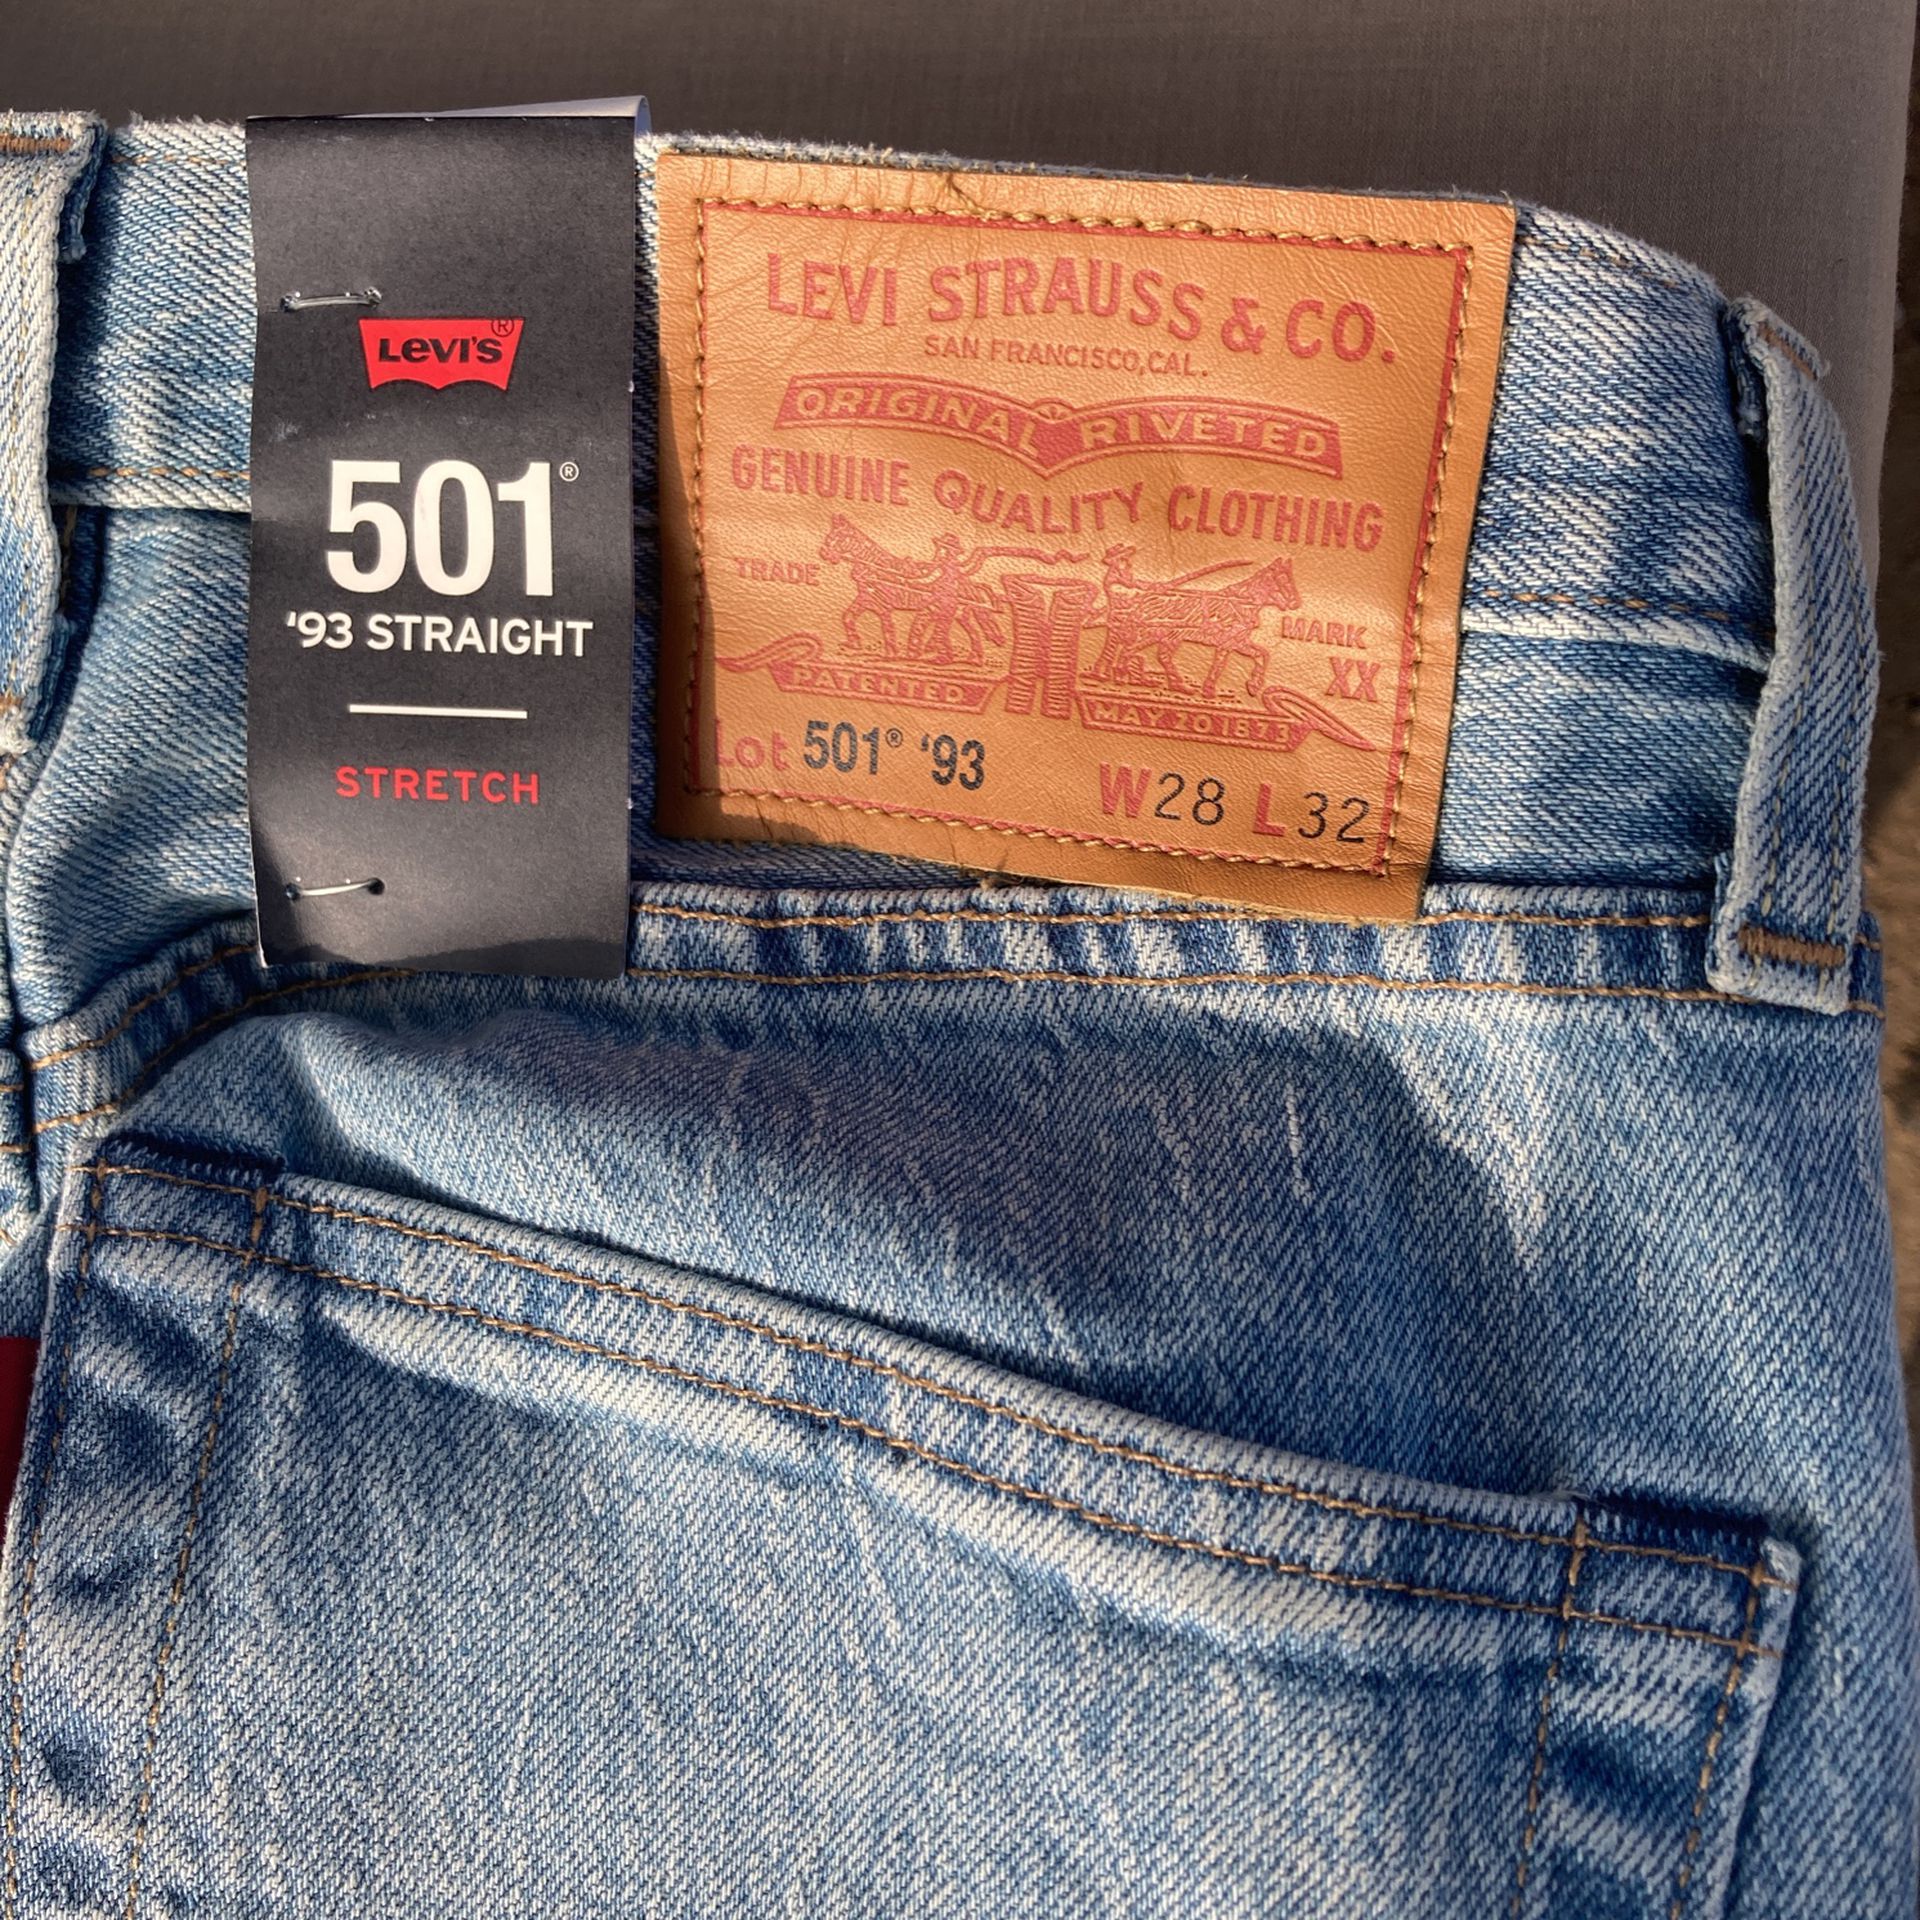 Levi's 501 for Sale in Bakersfield, CA - OfferUp